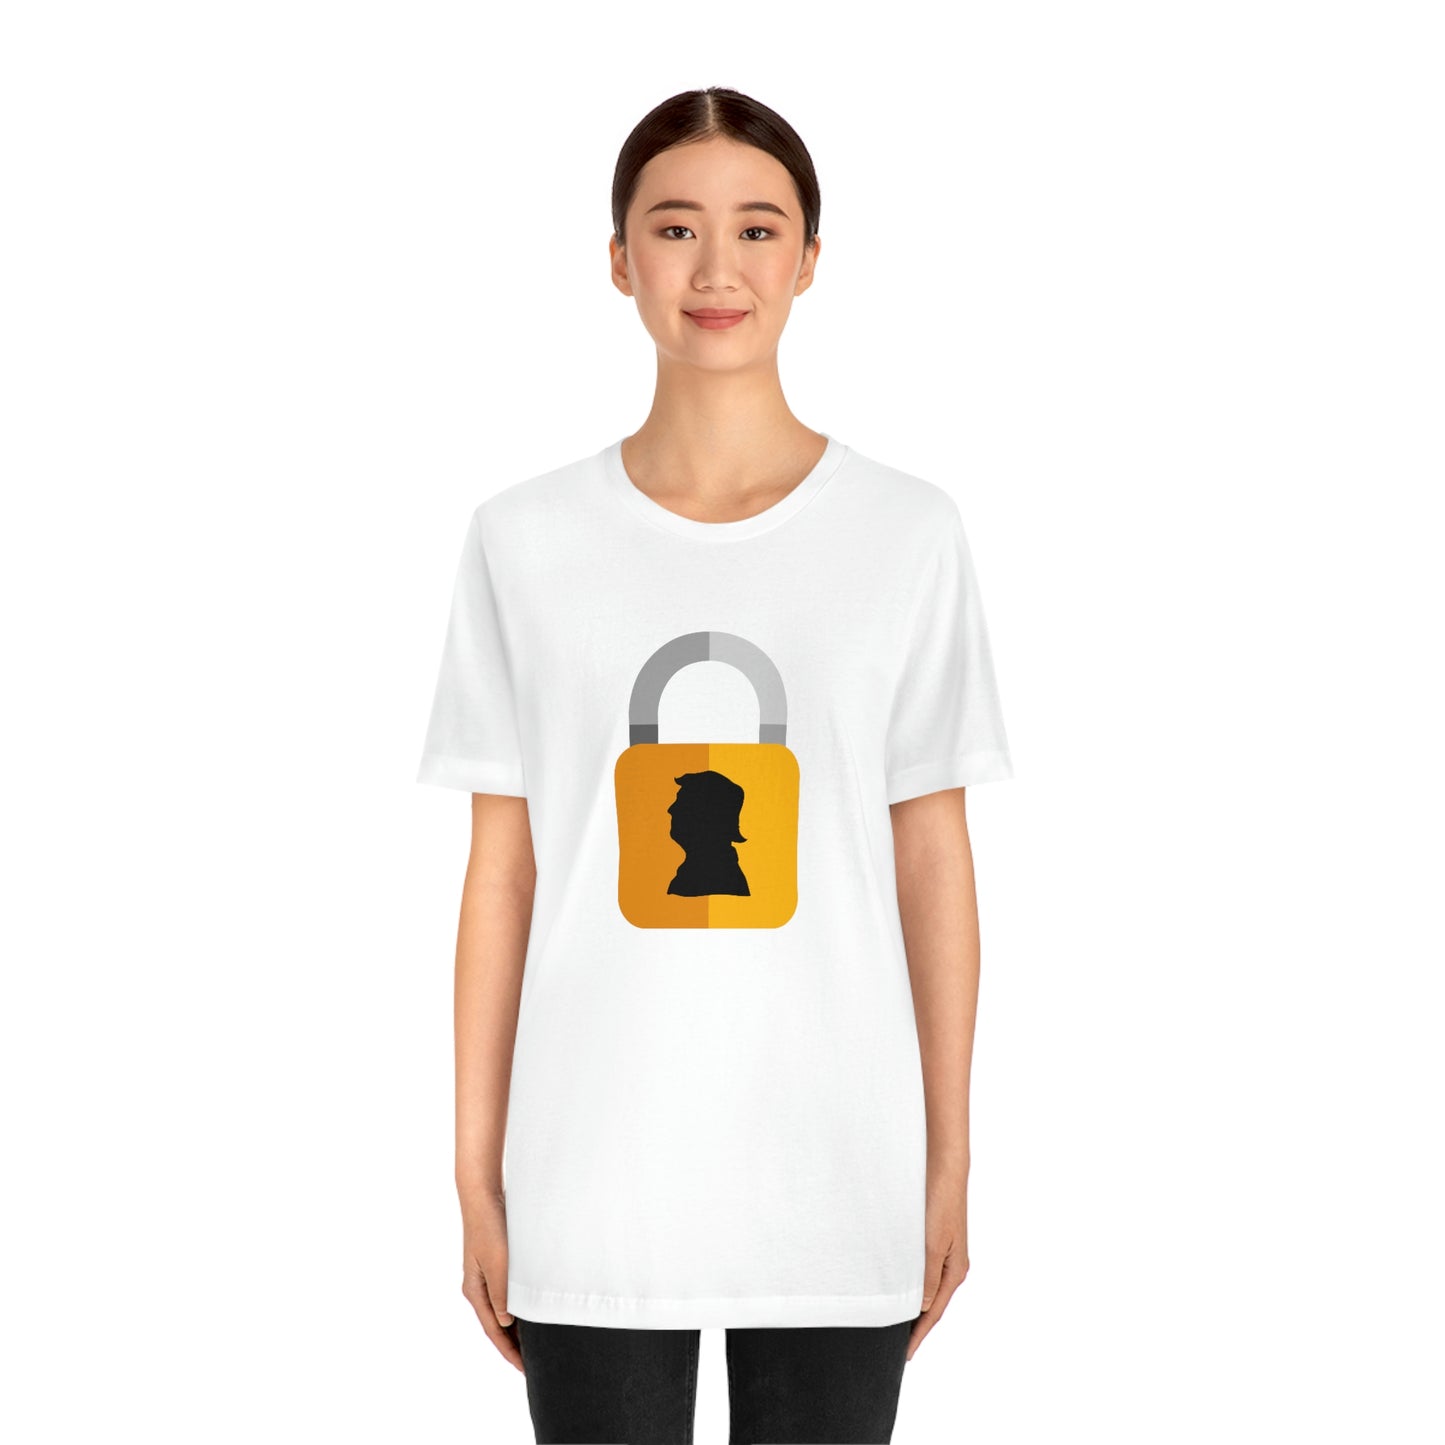 Lock Him Up T-Shirt with Gold Lock | EDGY T-Shirt Company | Funny Trump Unisex Jersey Short Sleeve Tee